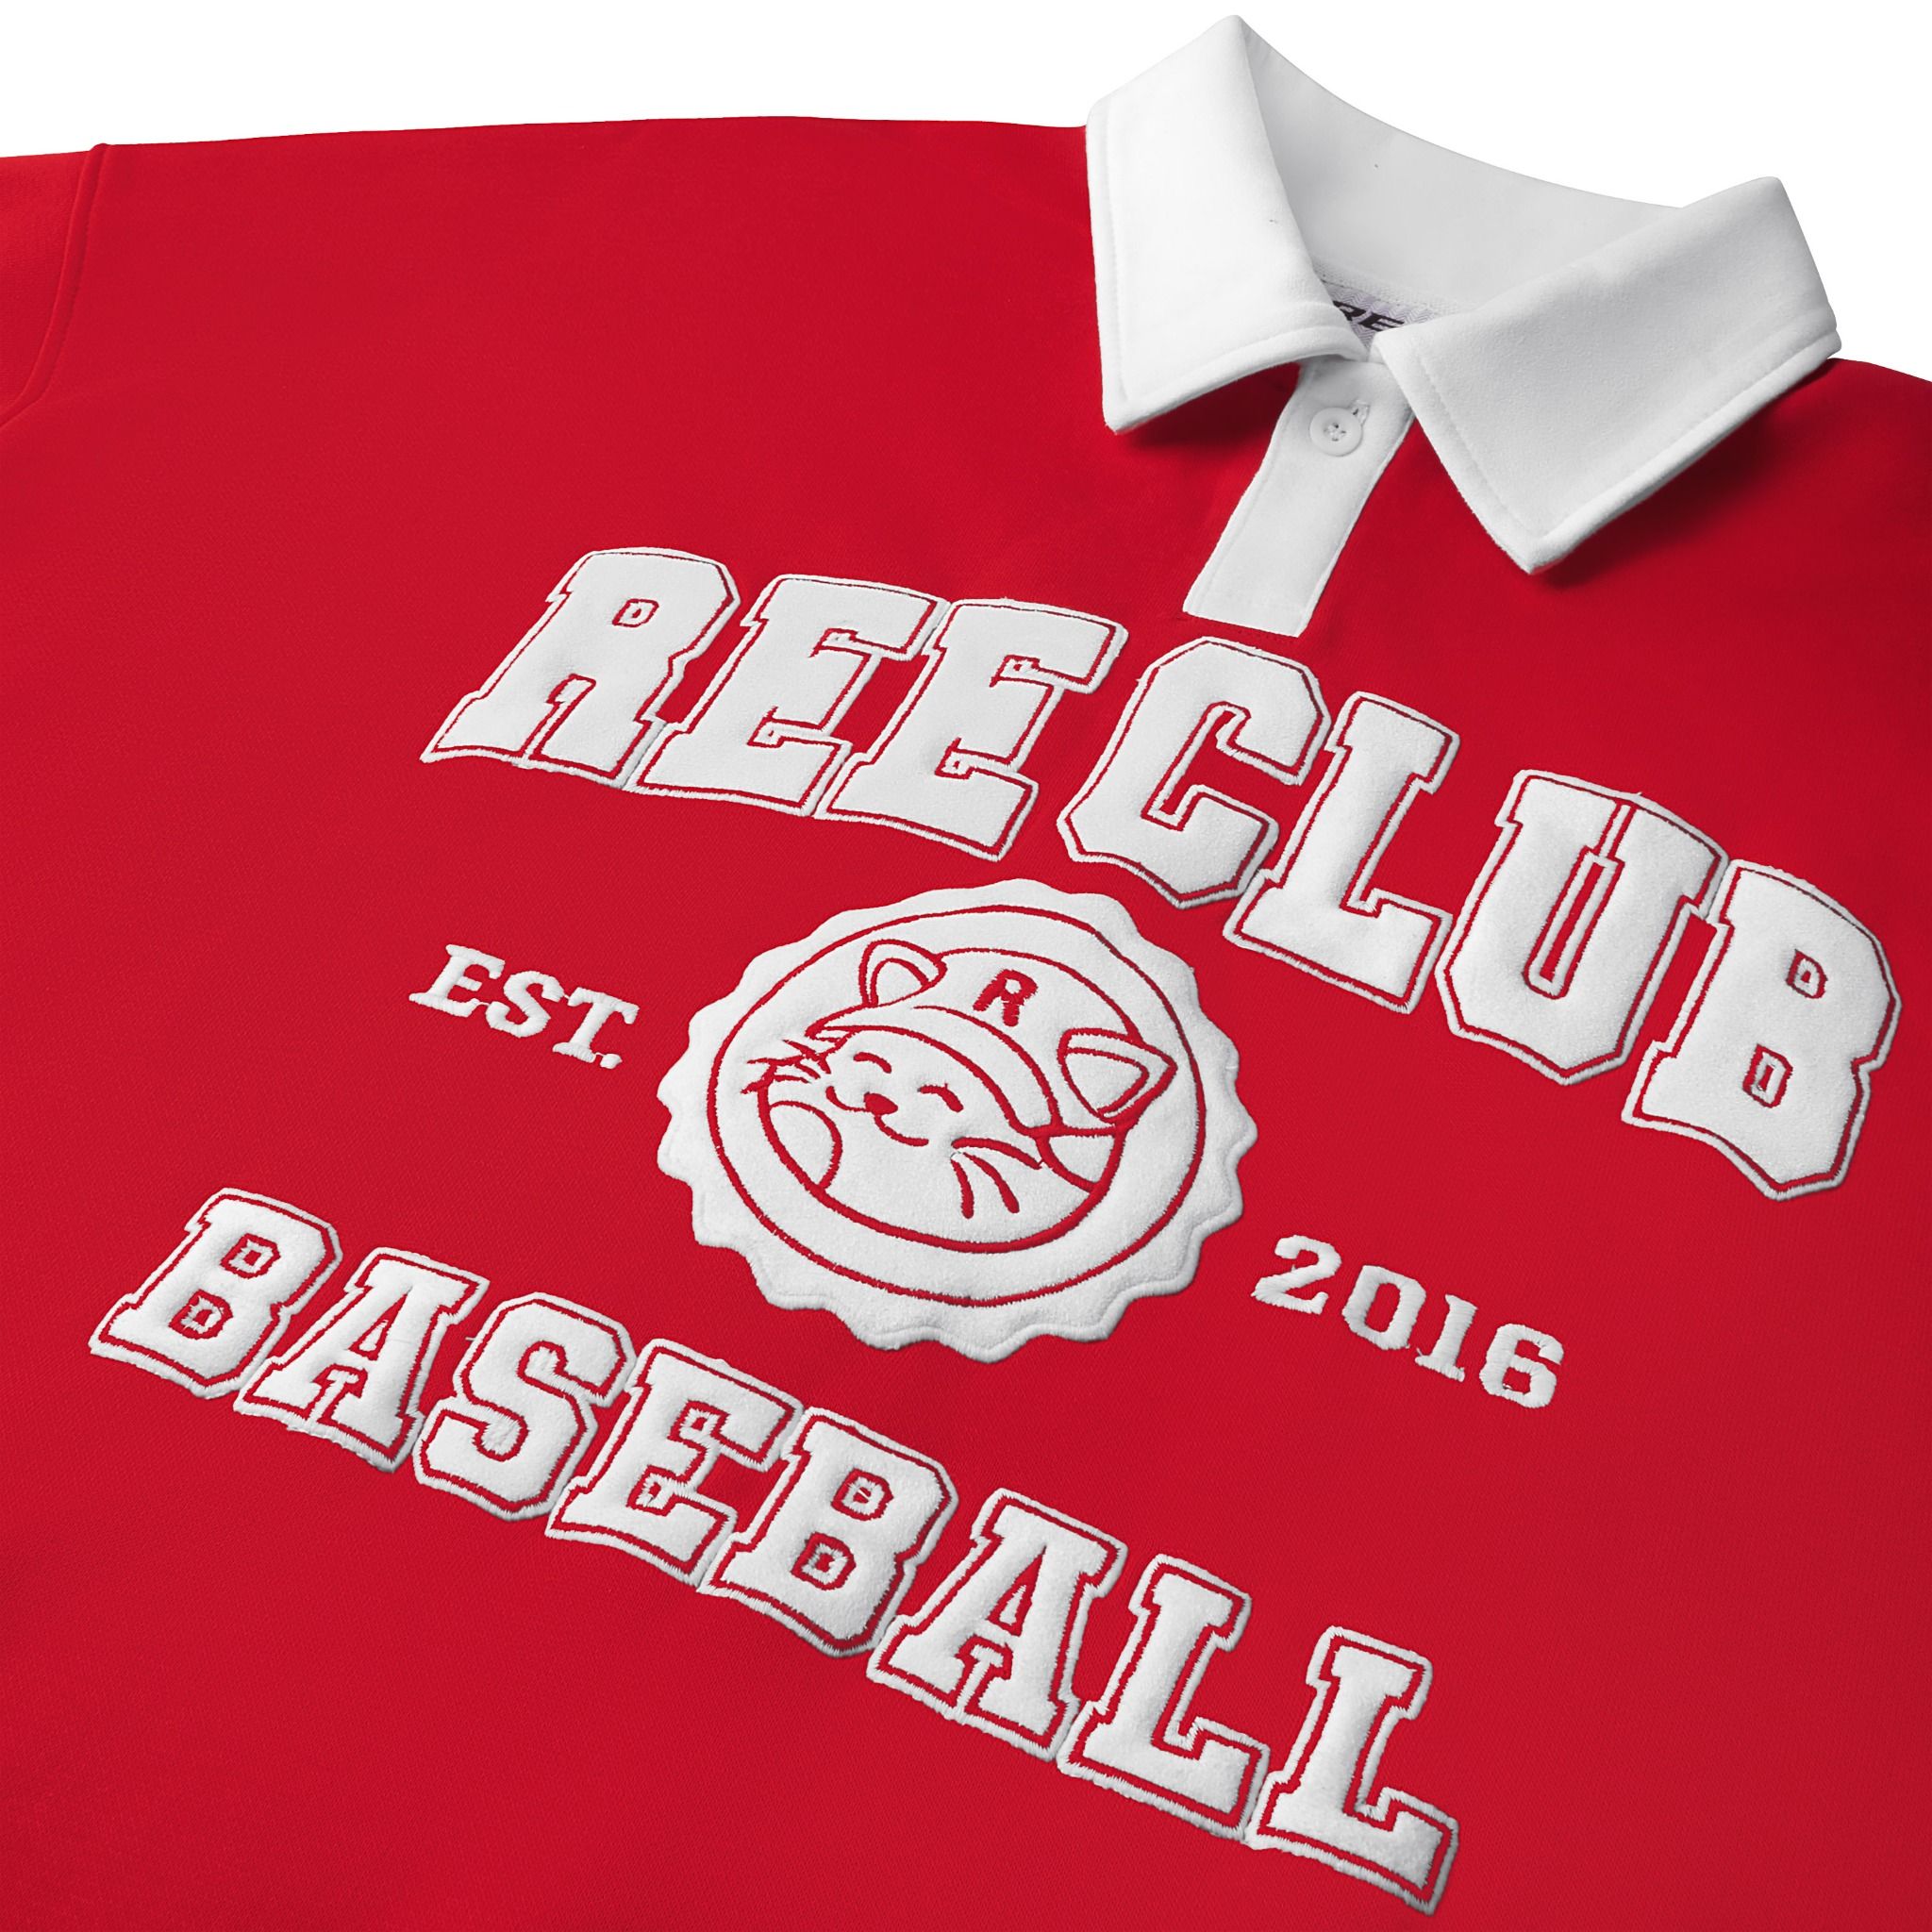 REE BASEBALL POLO SWEATER - RED